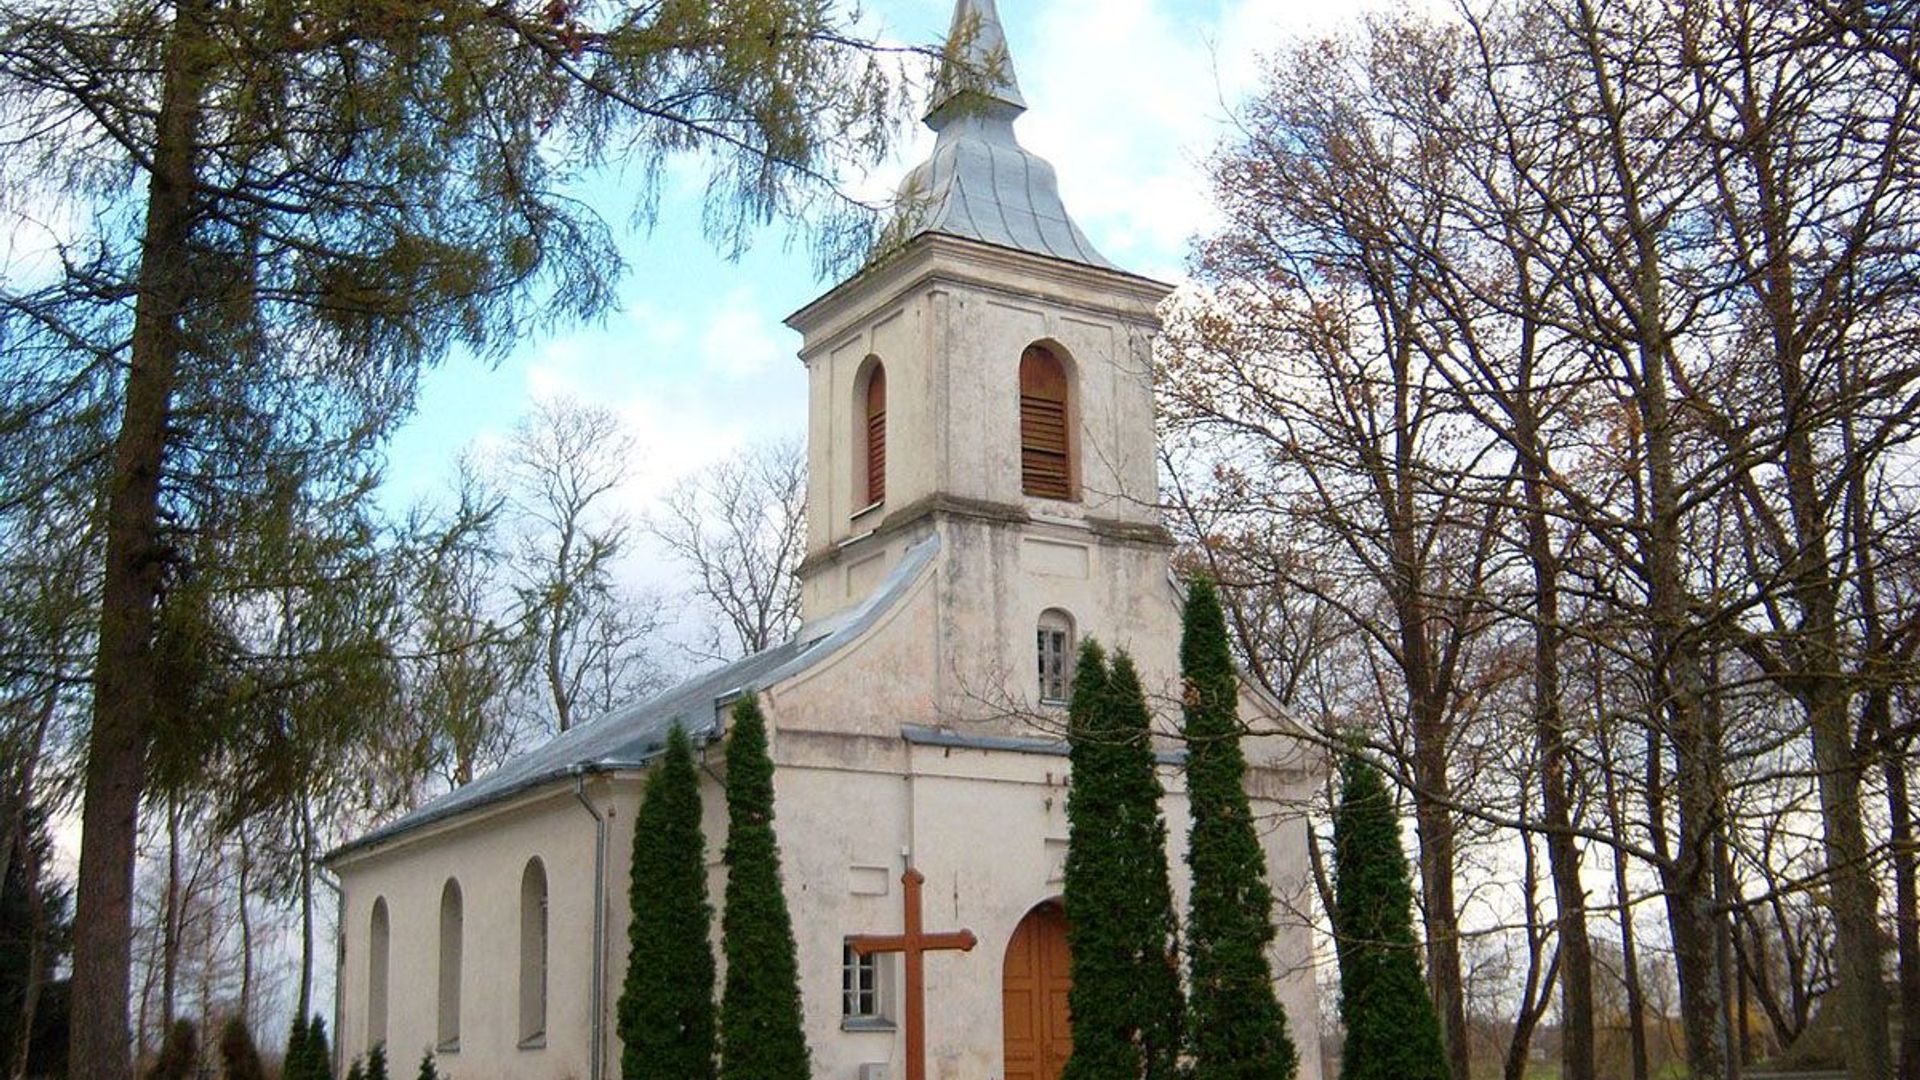 Surdegis Church of the Assumption of the Most Blessed Virgin Mary